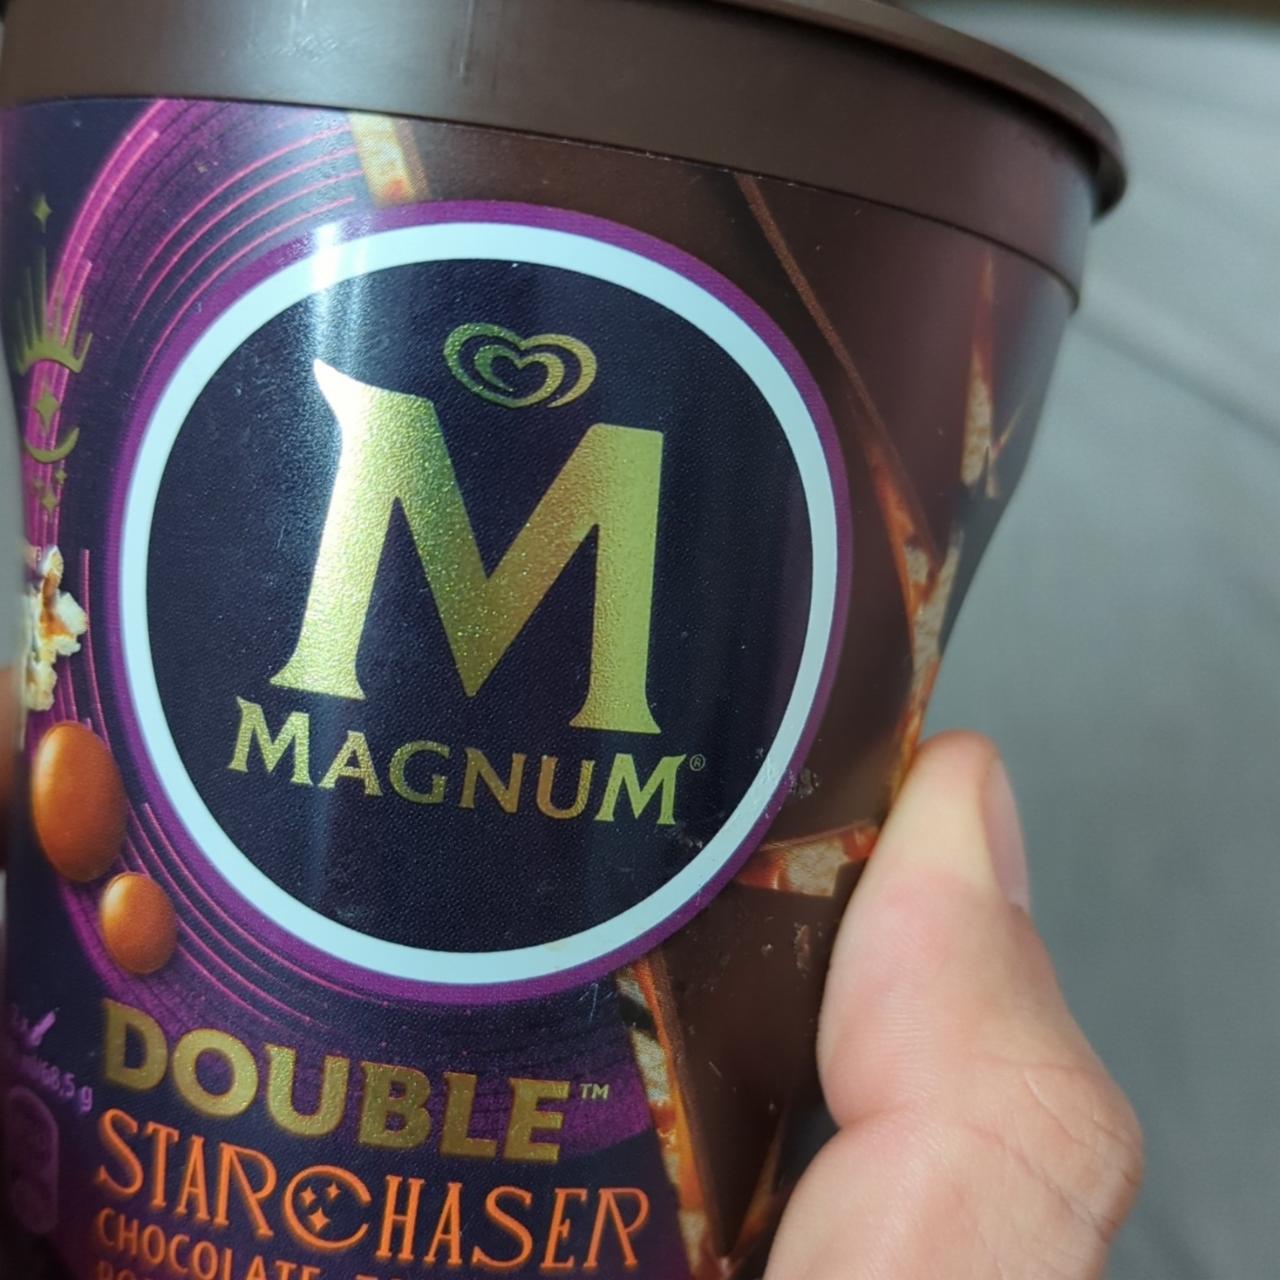 Fotografie - double starchaser chocolate toffee sauce popcorn flavour Magnum